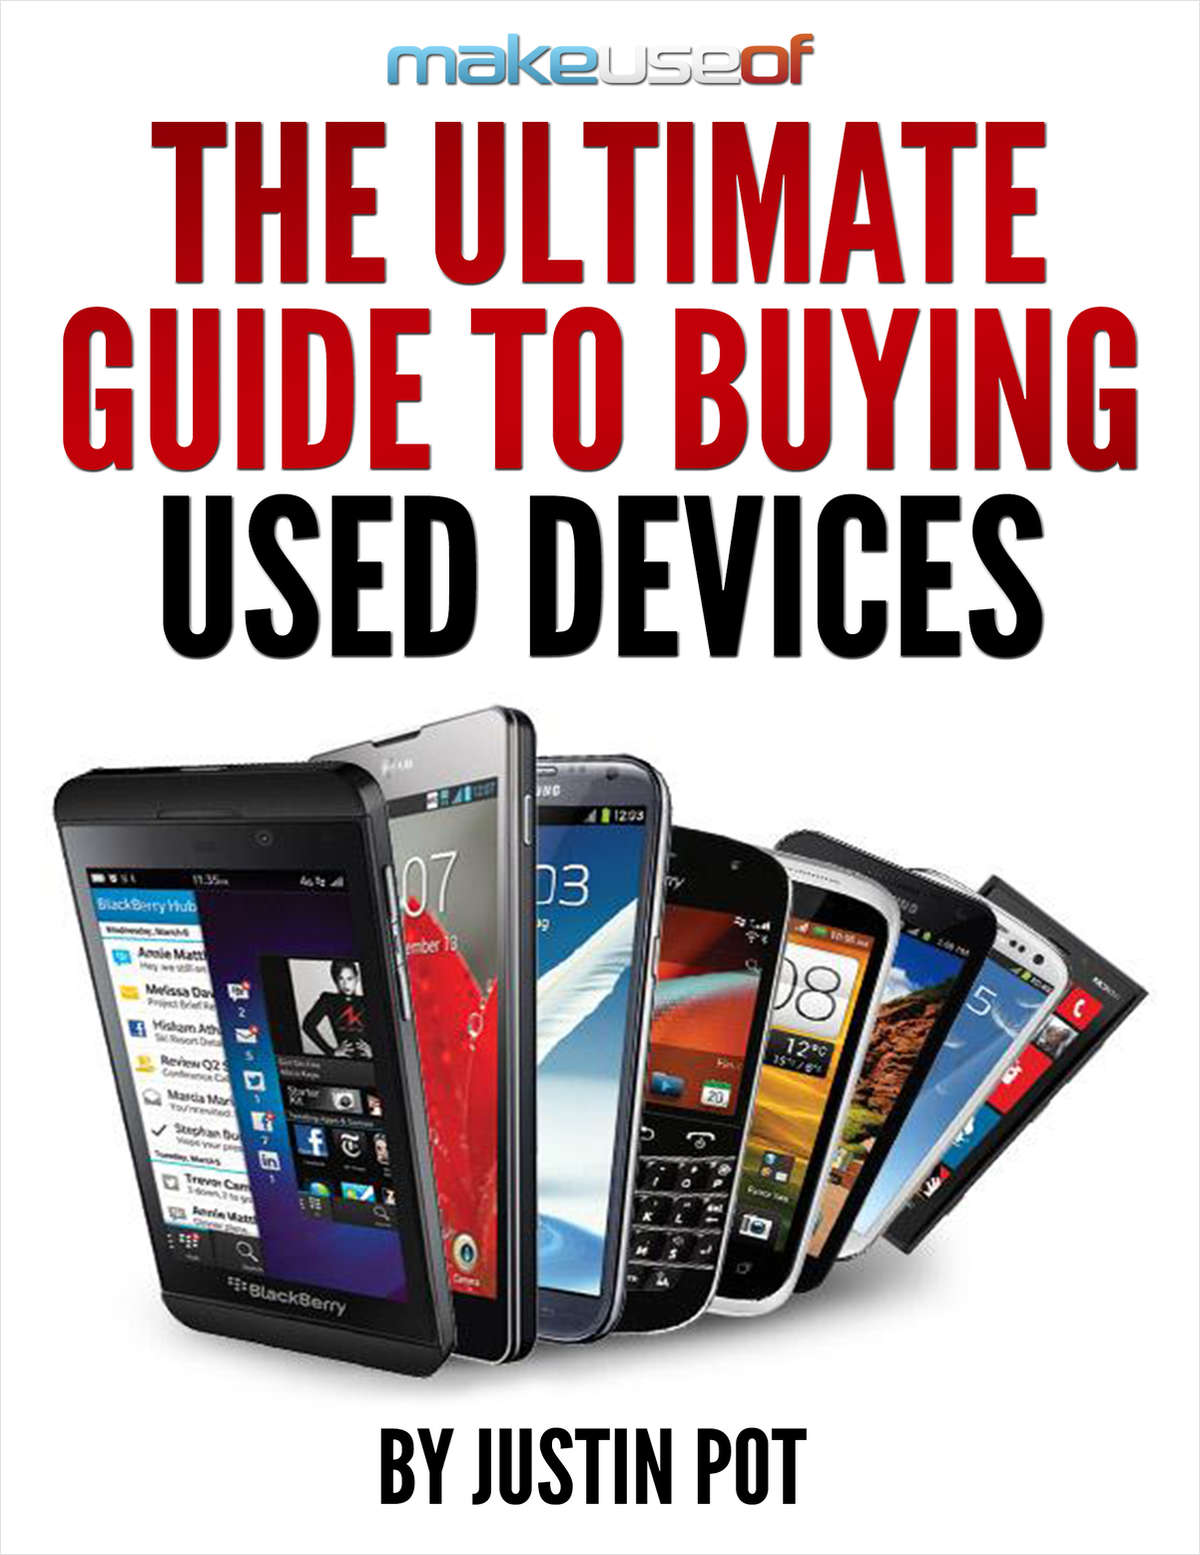 The Ultimate Guide to Buying Used Devices